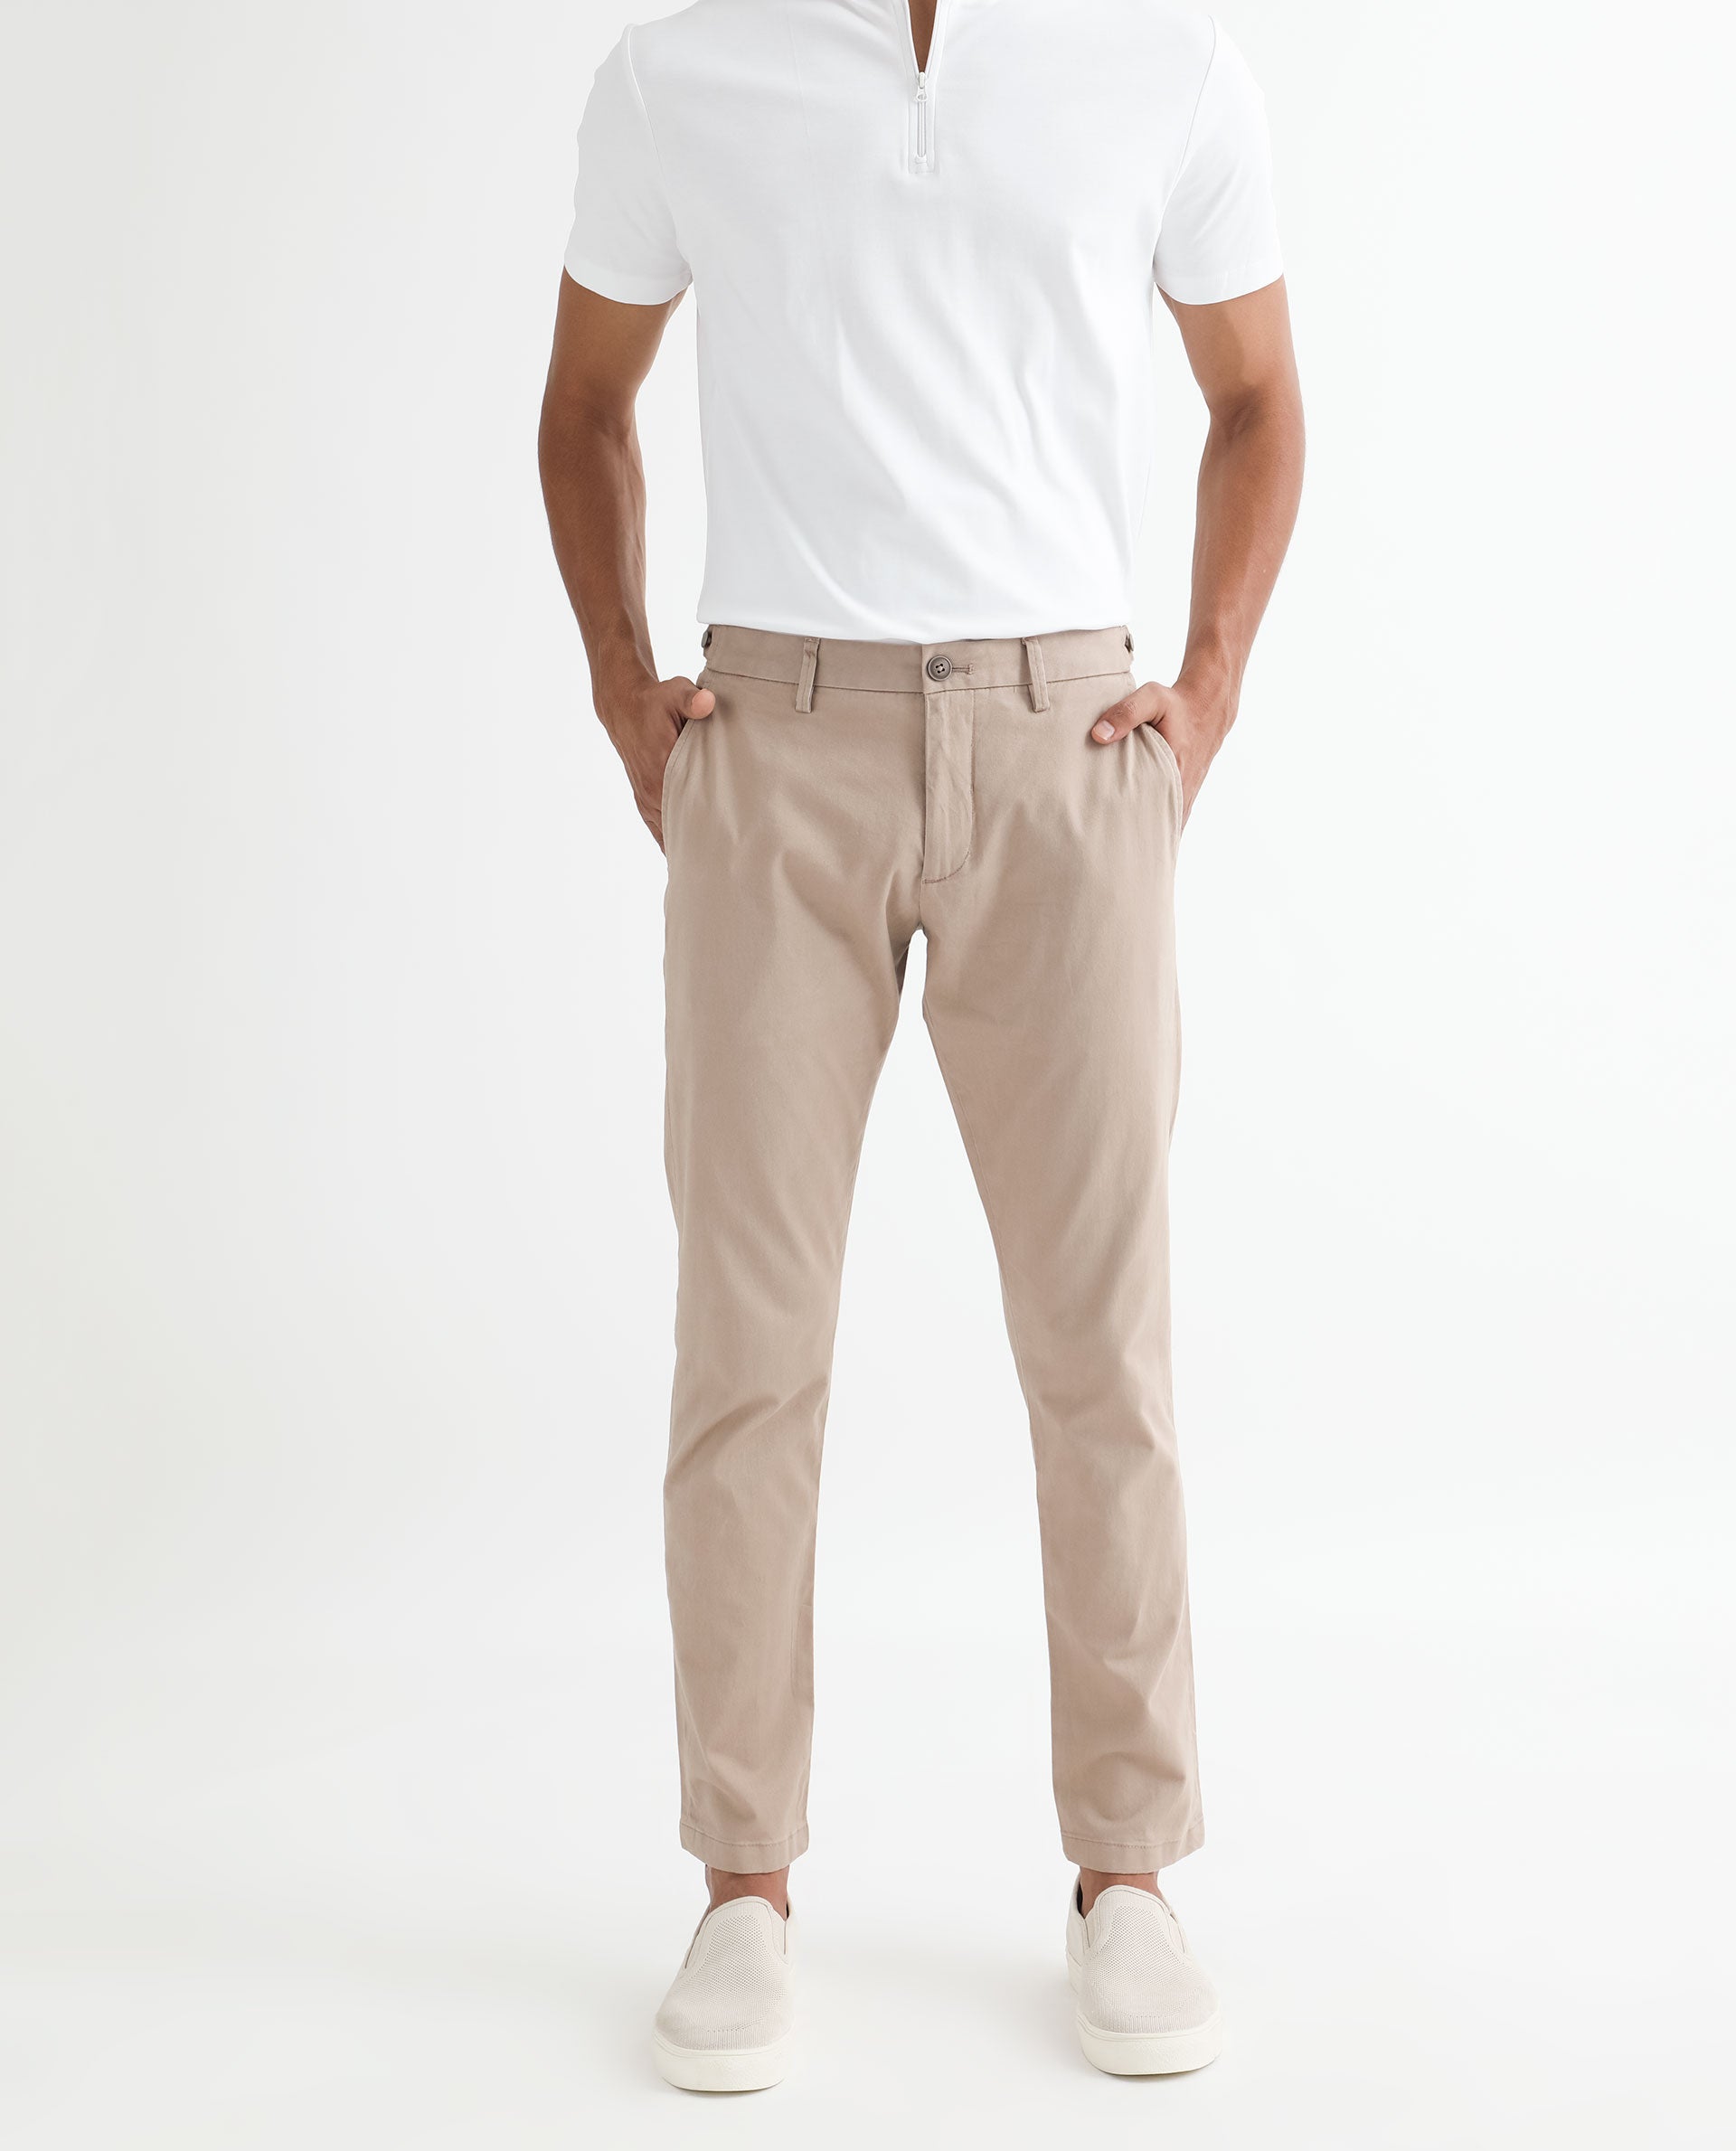 Man in white polo shirt and black pants standing near white wall during  daytime photo – Free Businessman Image on Unsplash